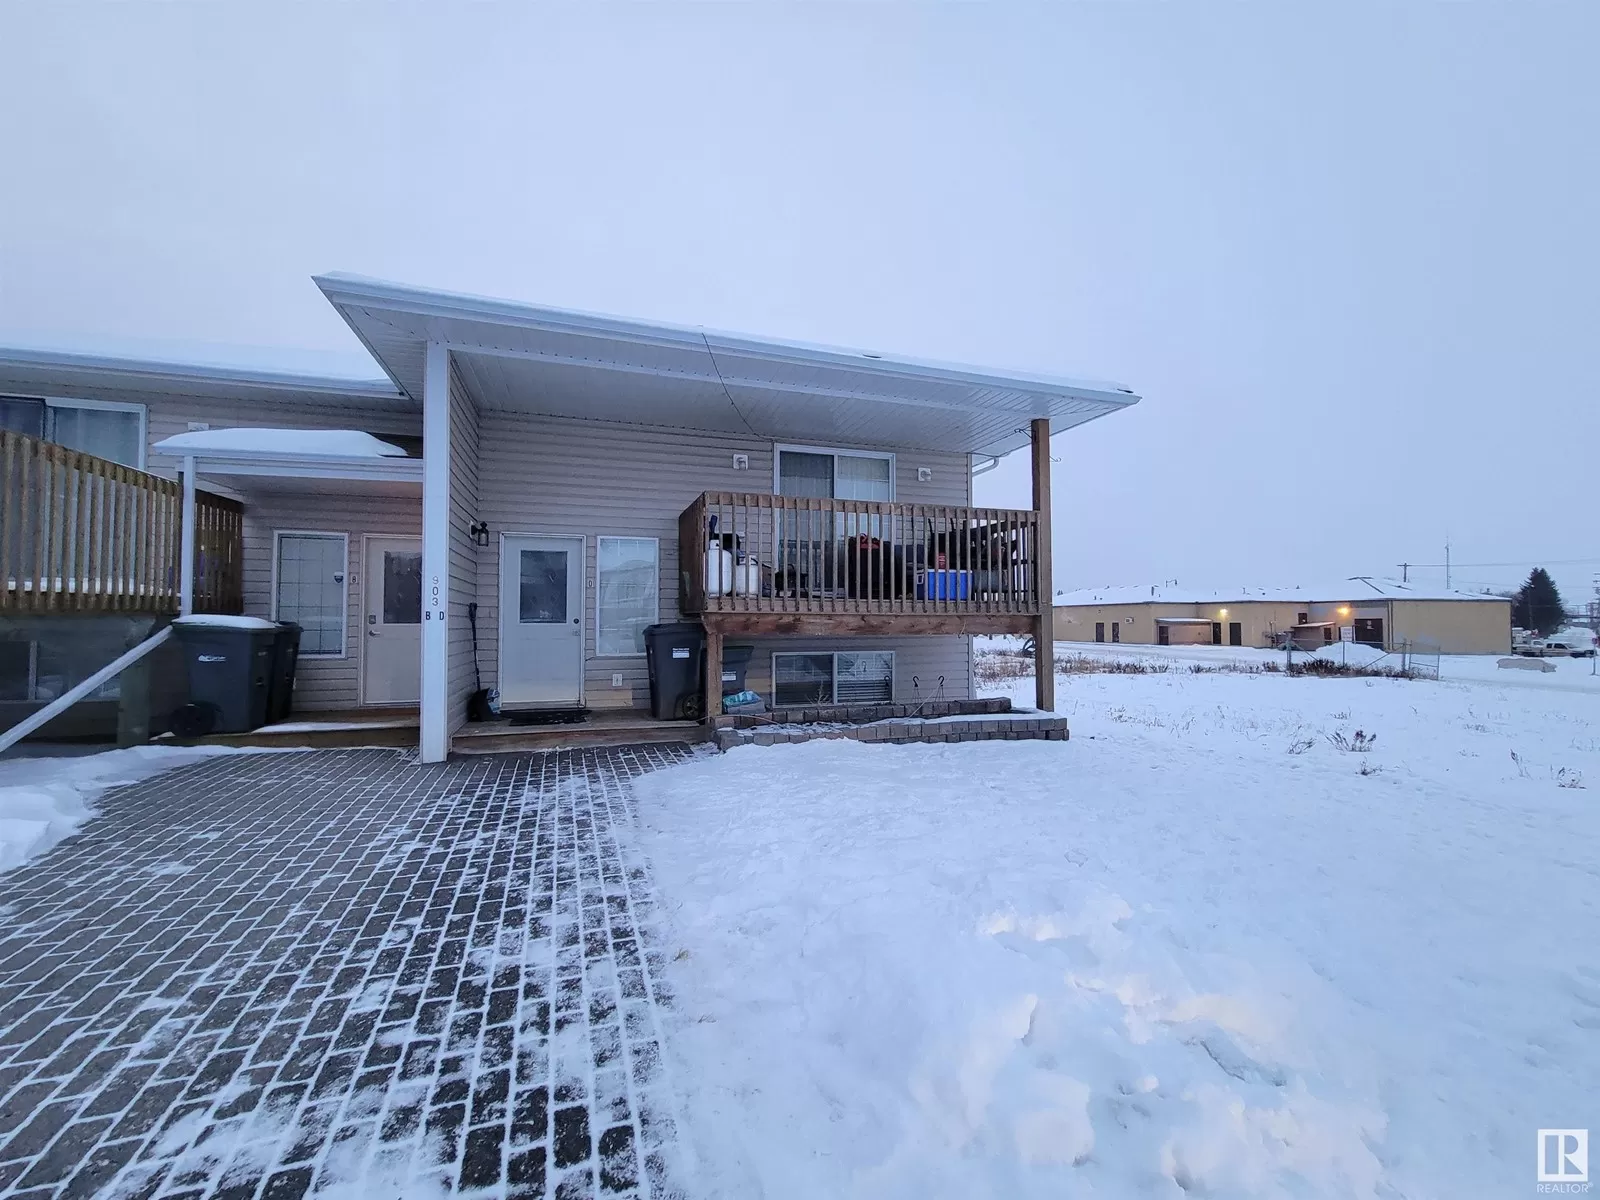 Row / Townhouse for rent: #unit 4 / D 903 9 St, Cold Lake, Alberta T9M 1H8